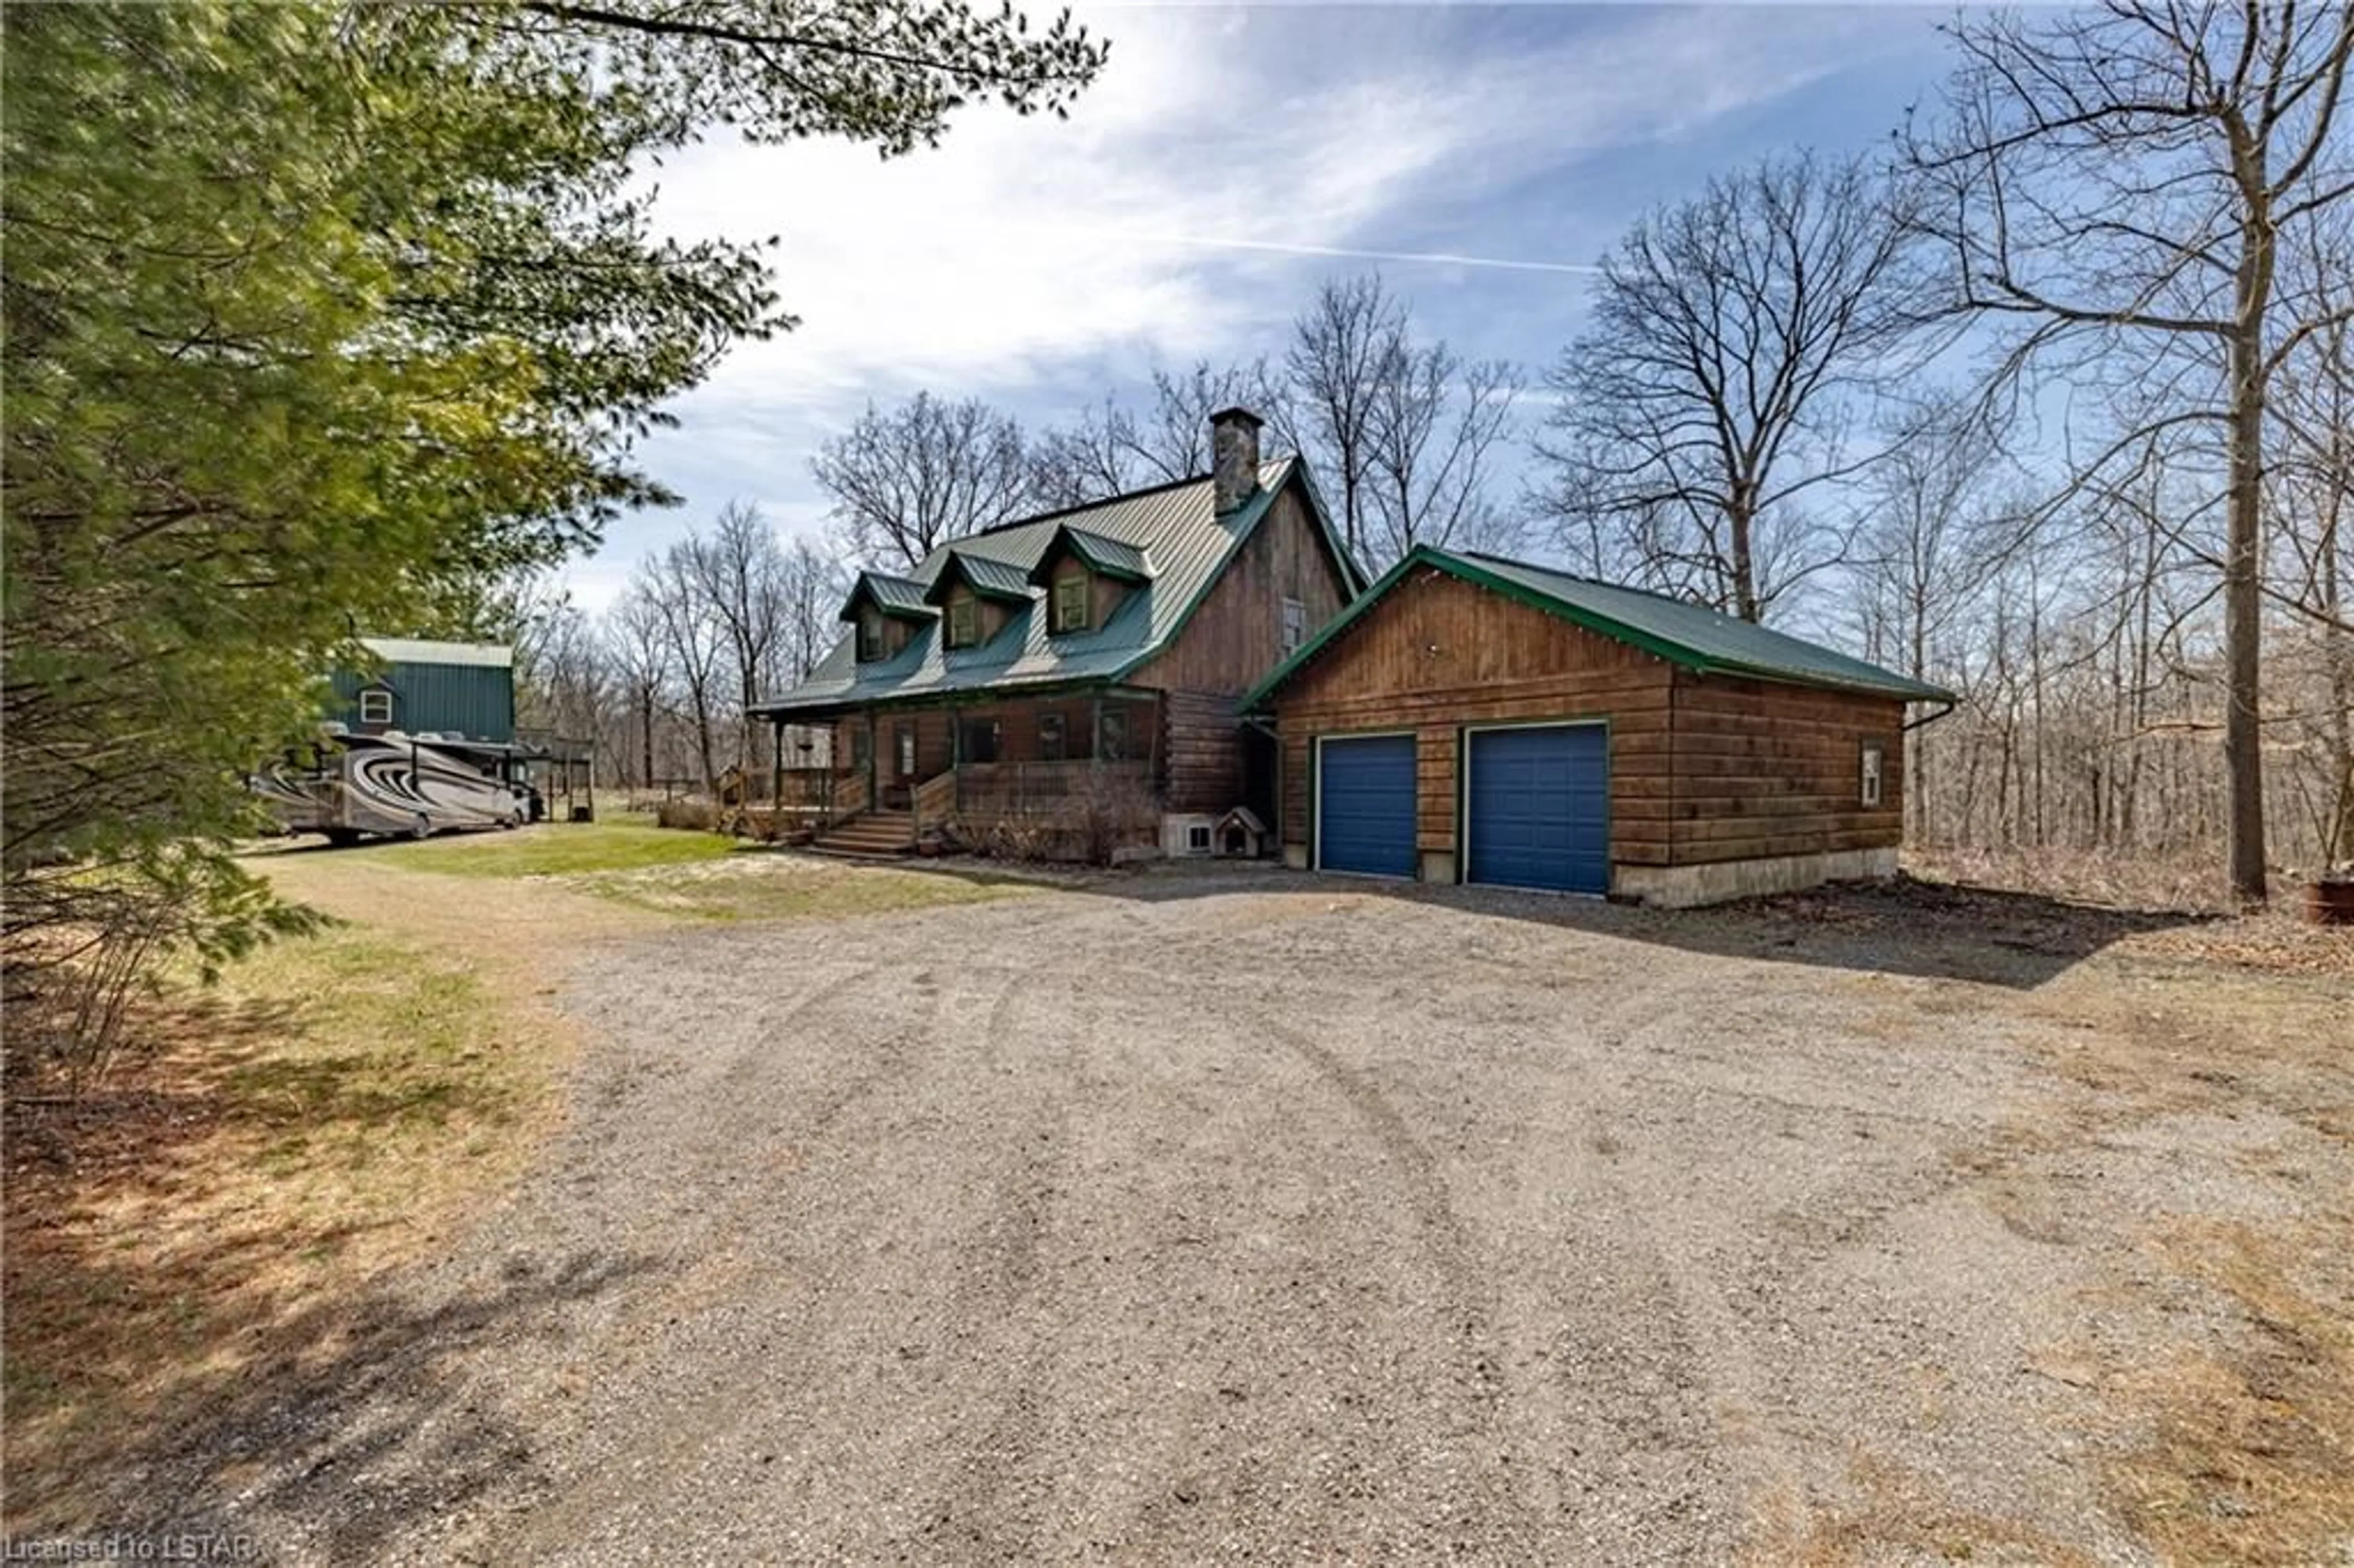 Cottage for 14653 Currie Rd, Dutton Ontario N0L 1J0